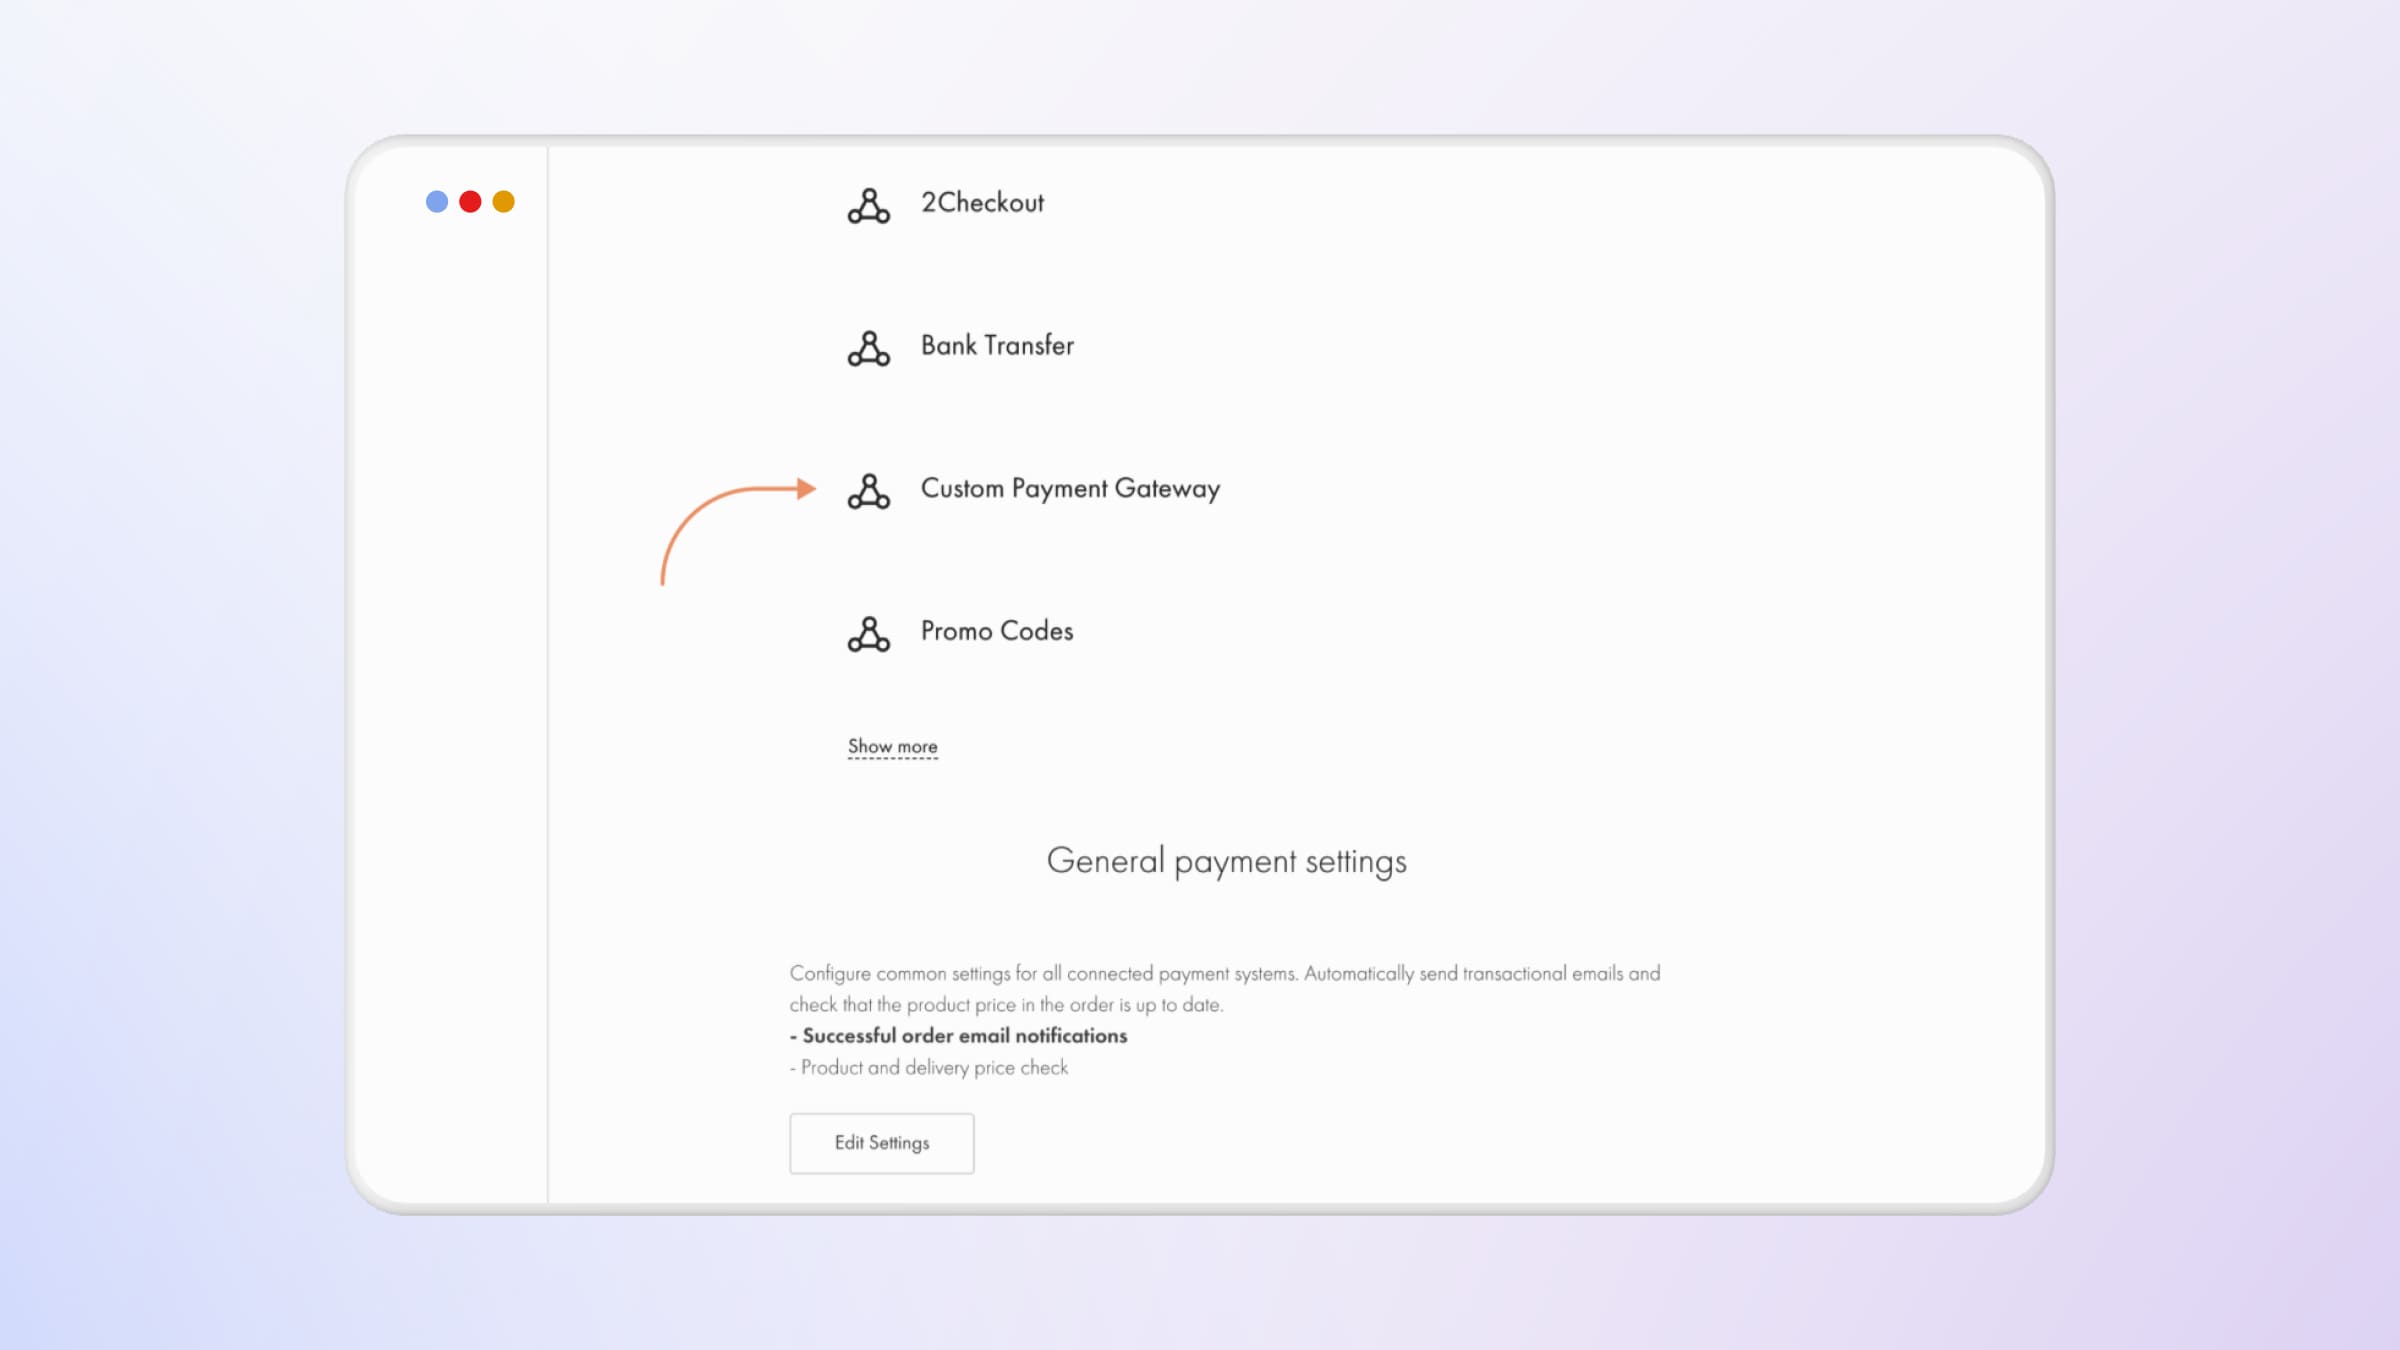 To connect the Custom Payment Gateway on Tilda, follow the instructions.